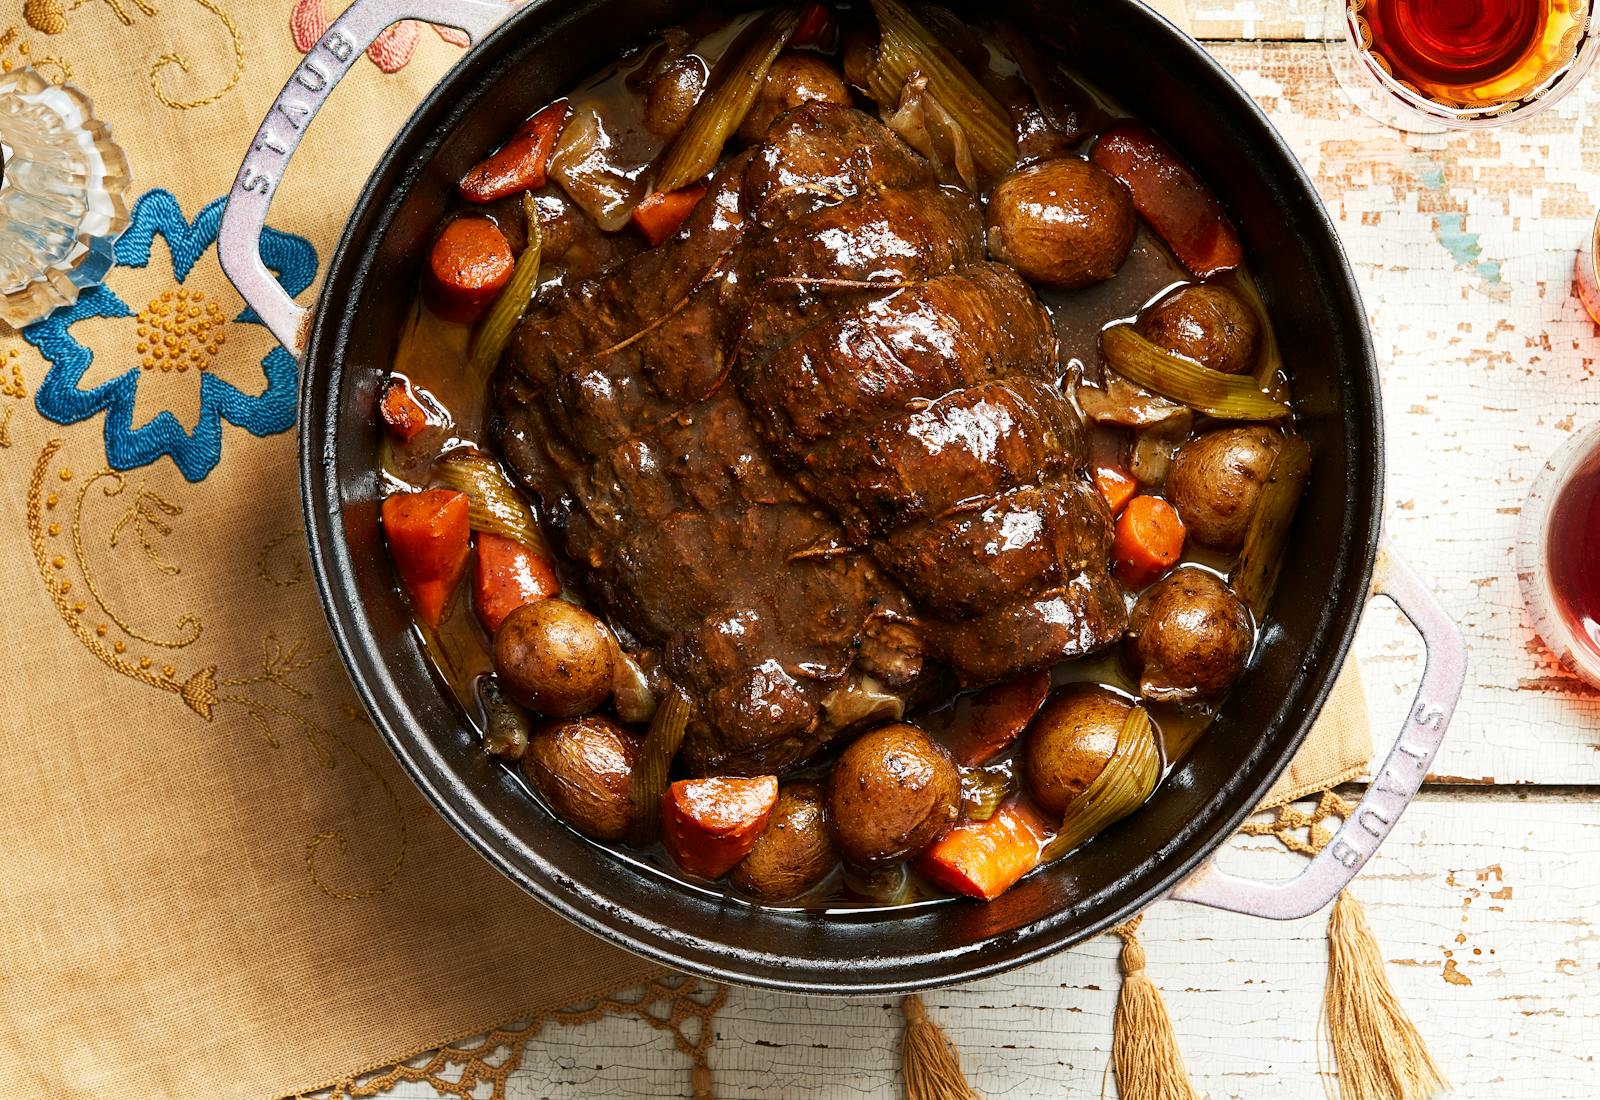 Red wine-braised chuck roast with vegetables.